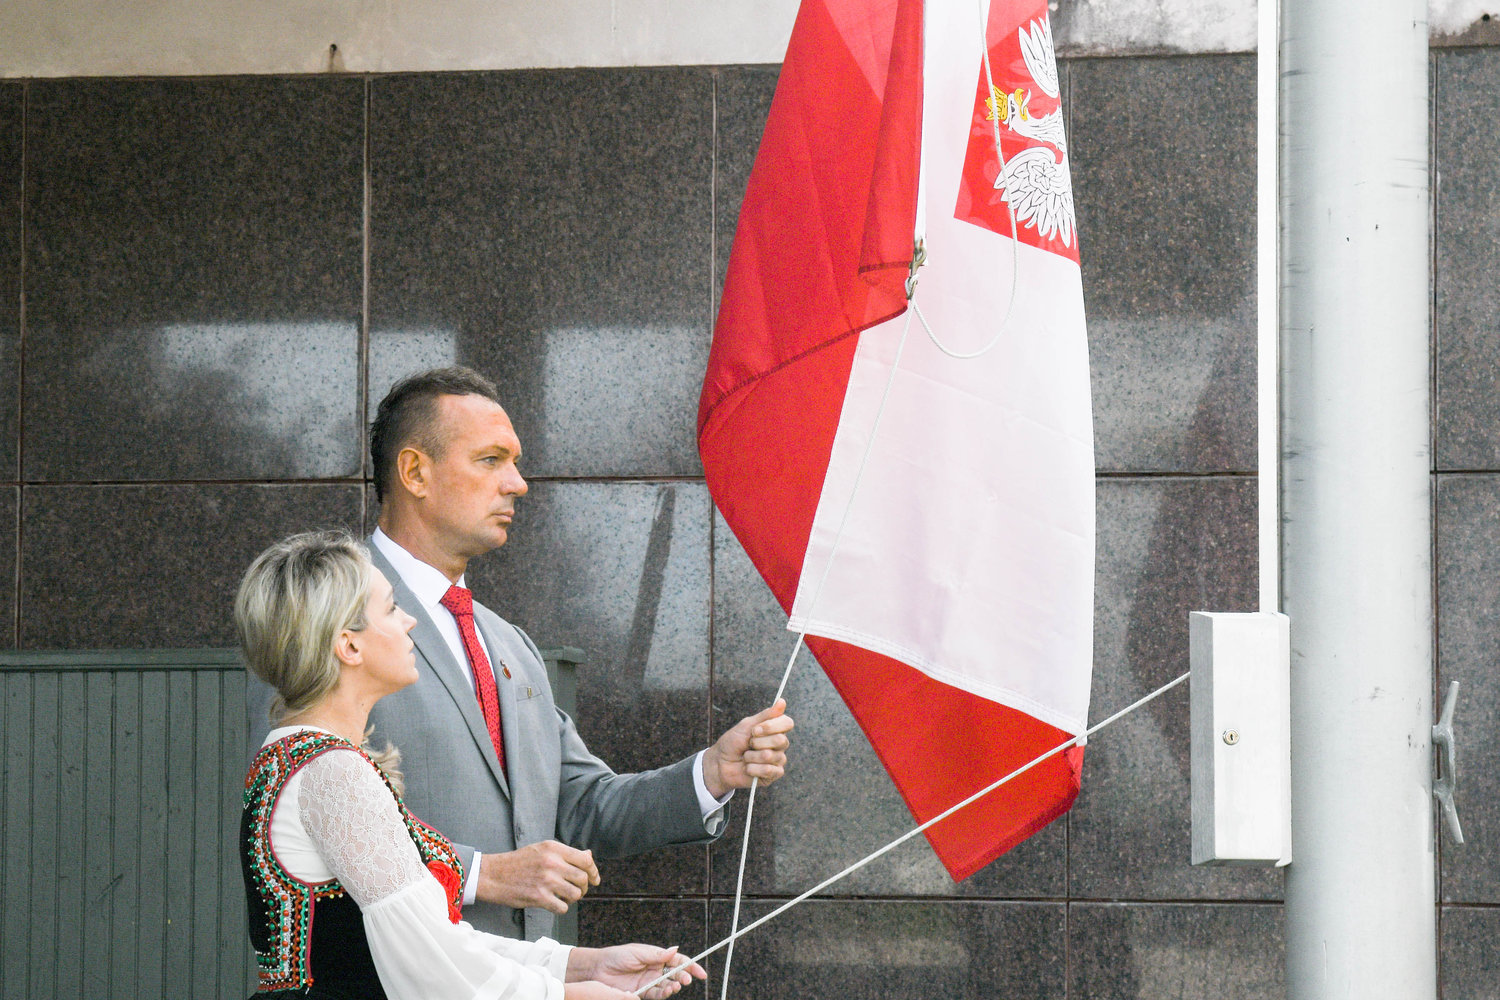 The annual Polish flag raising ceremony was conducted in honor of Polish-American Heritage Month on Friday, Sept. 30 at Hanna Park in Utica.